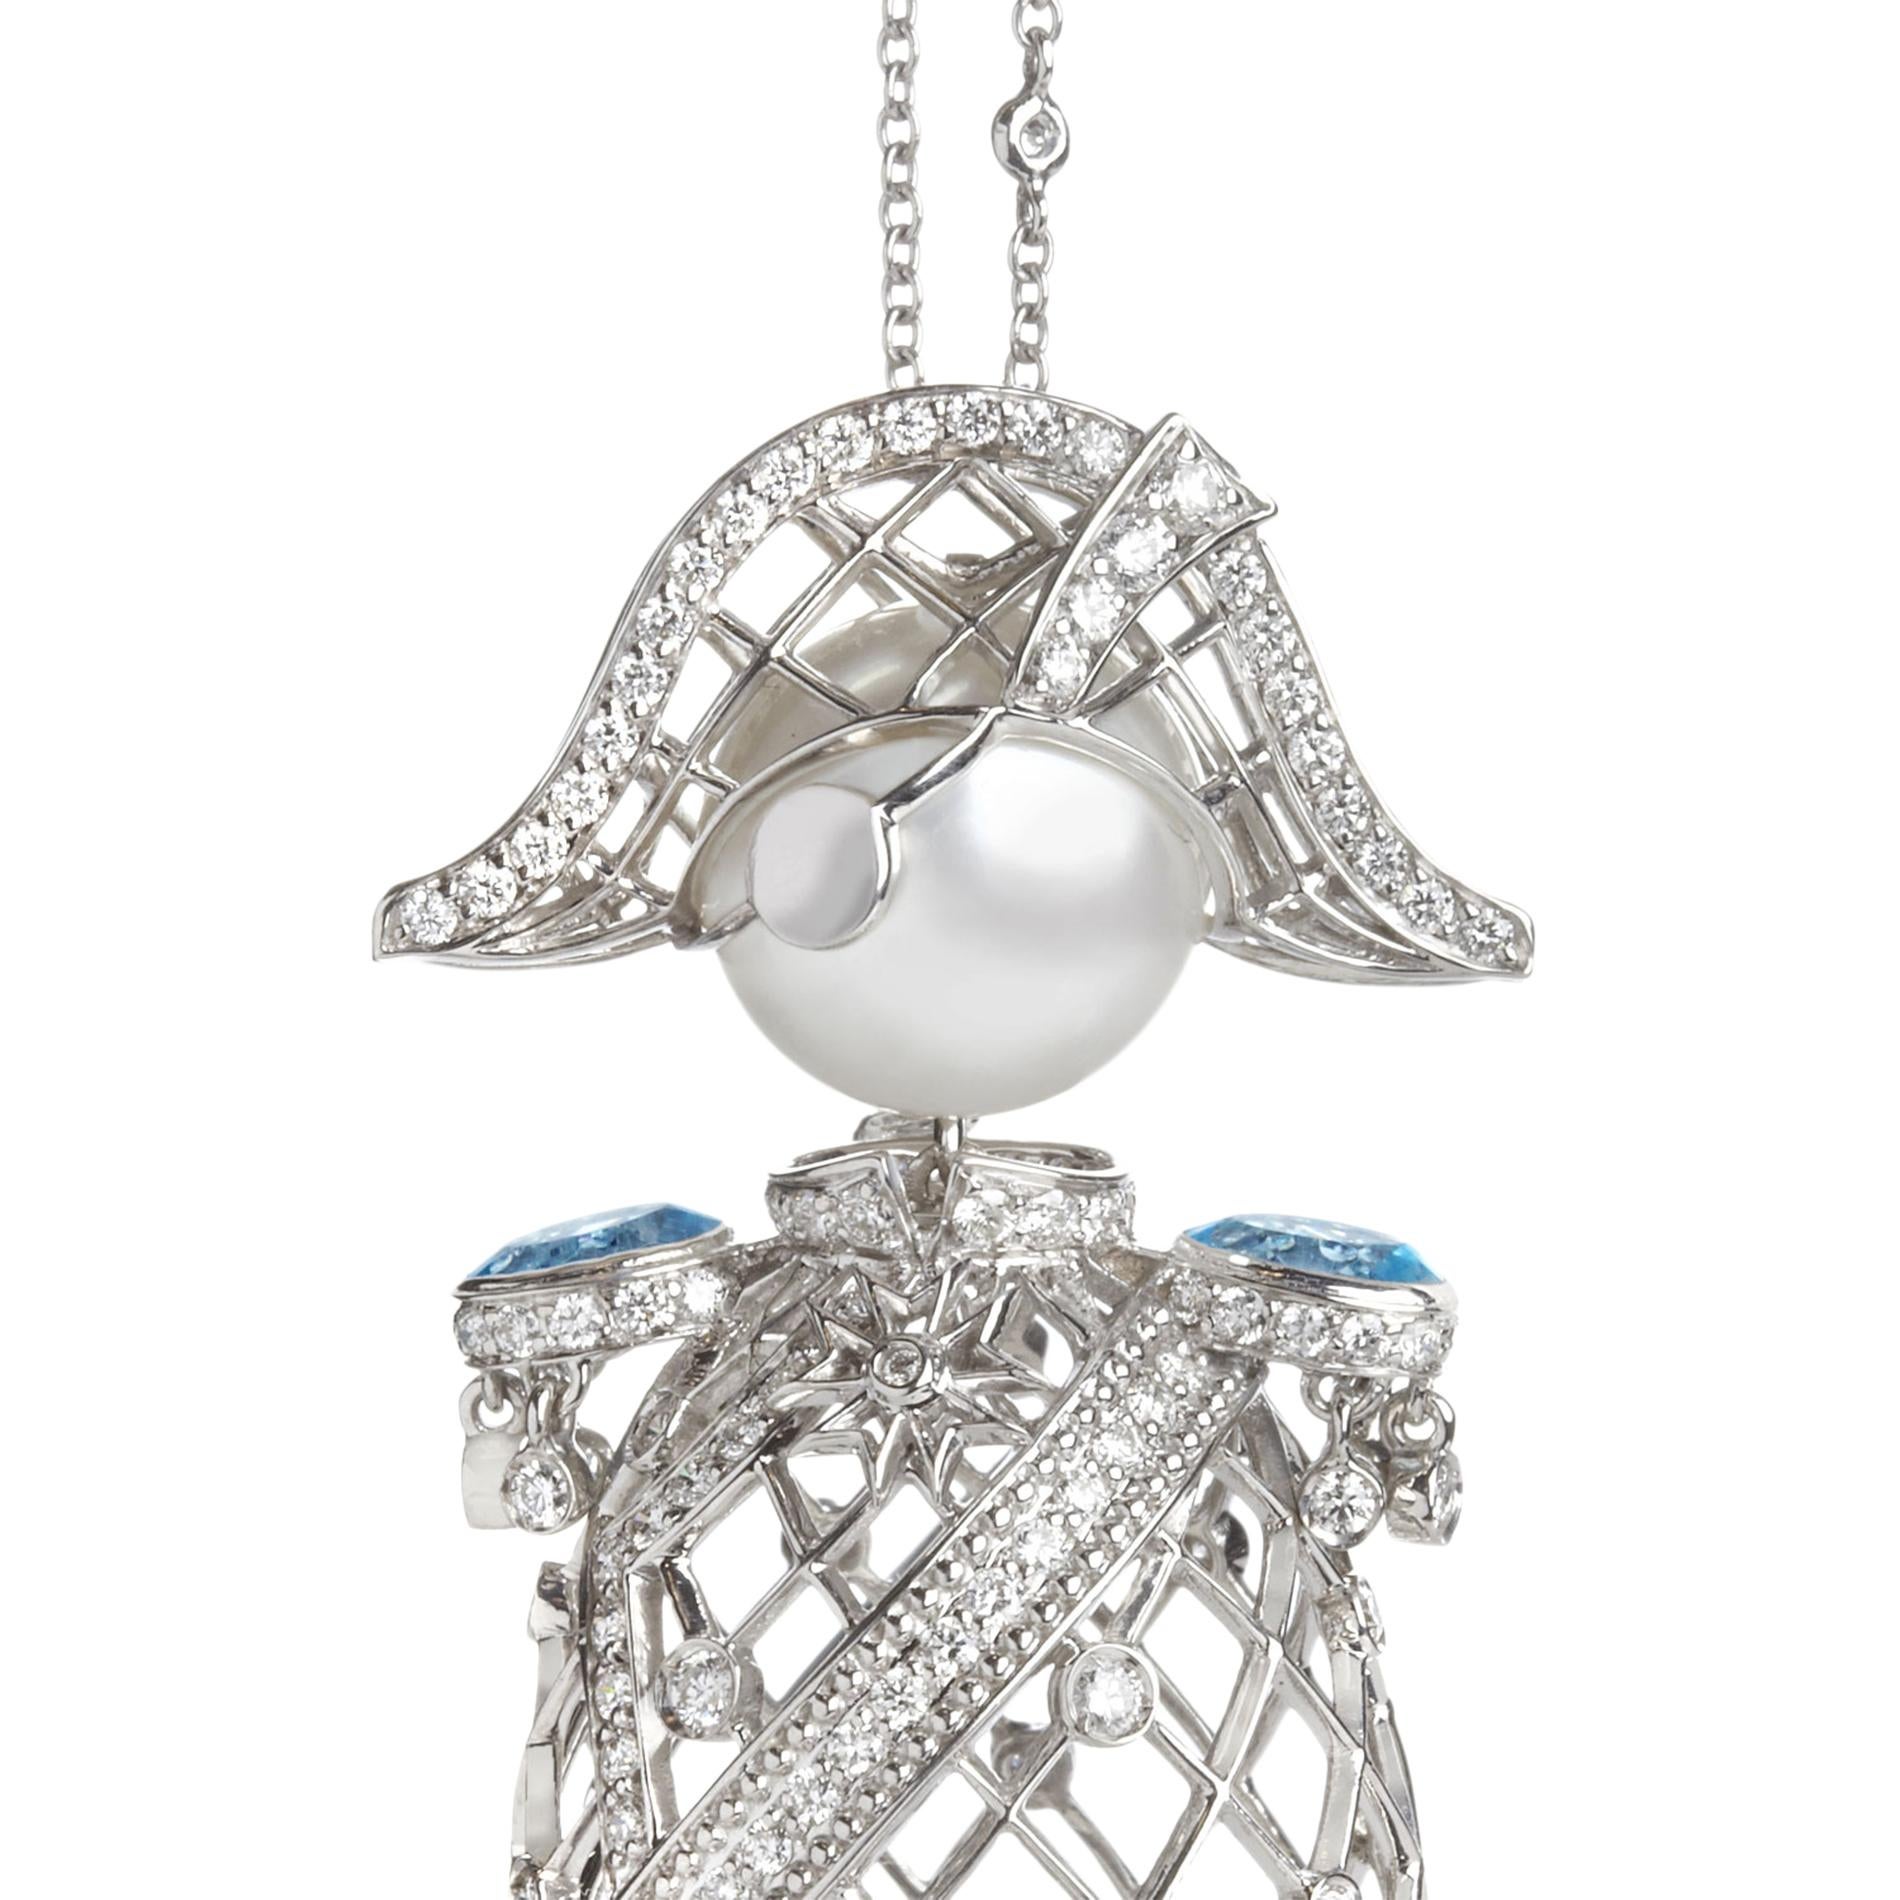 Inspired by the life of the legendary British Royal Navy officer, the Nelson pendant reimagines the glory and heritage of naval life here in 18k white gold, set with dazzling diamonds and blue topaz. Every playful detail, from a miniature white gold